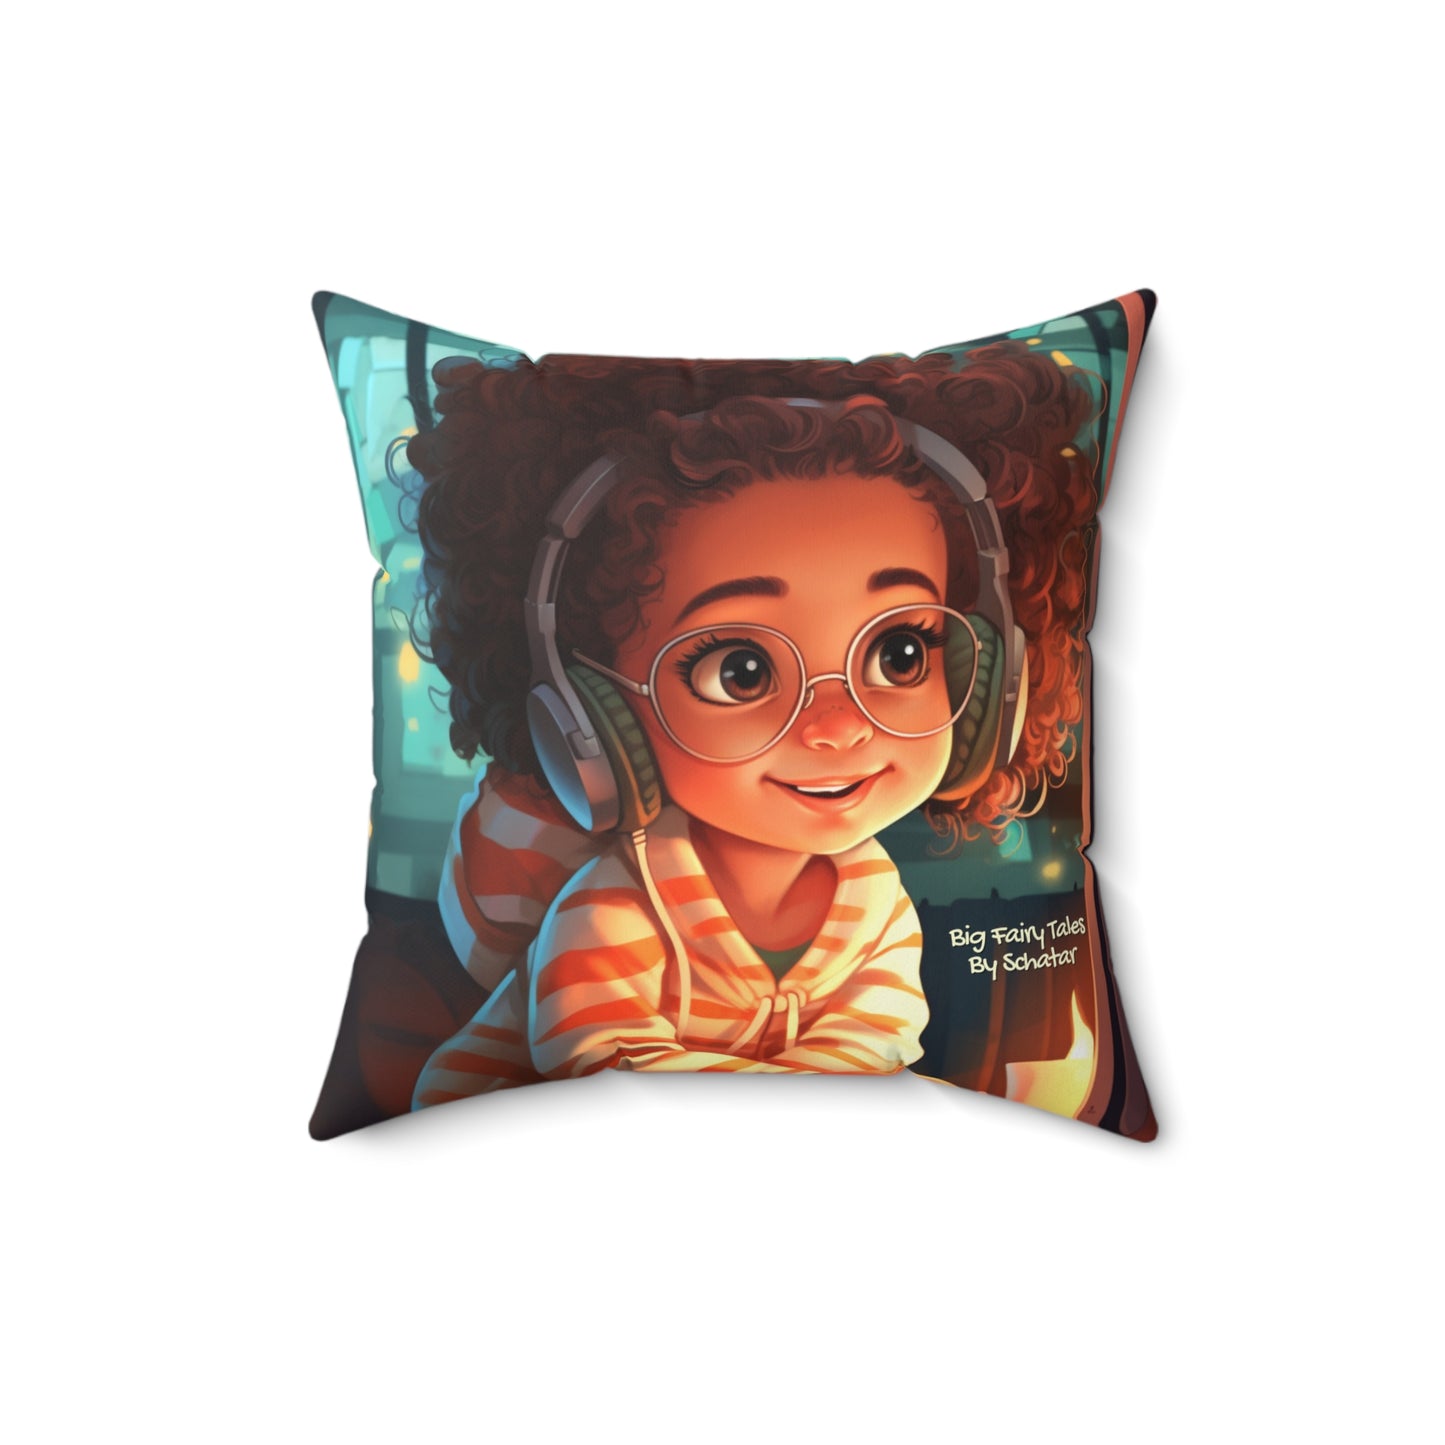 Multimedia Producer - Big Little Professionals Plush Pillow 17 From Big Fairy Tales By Schatar